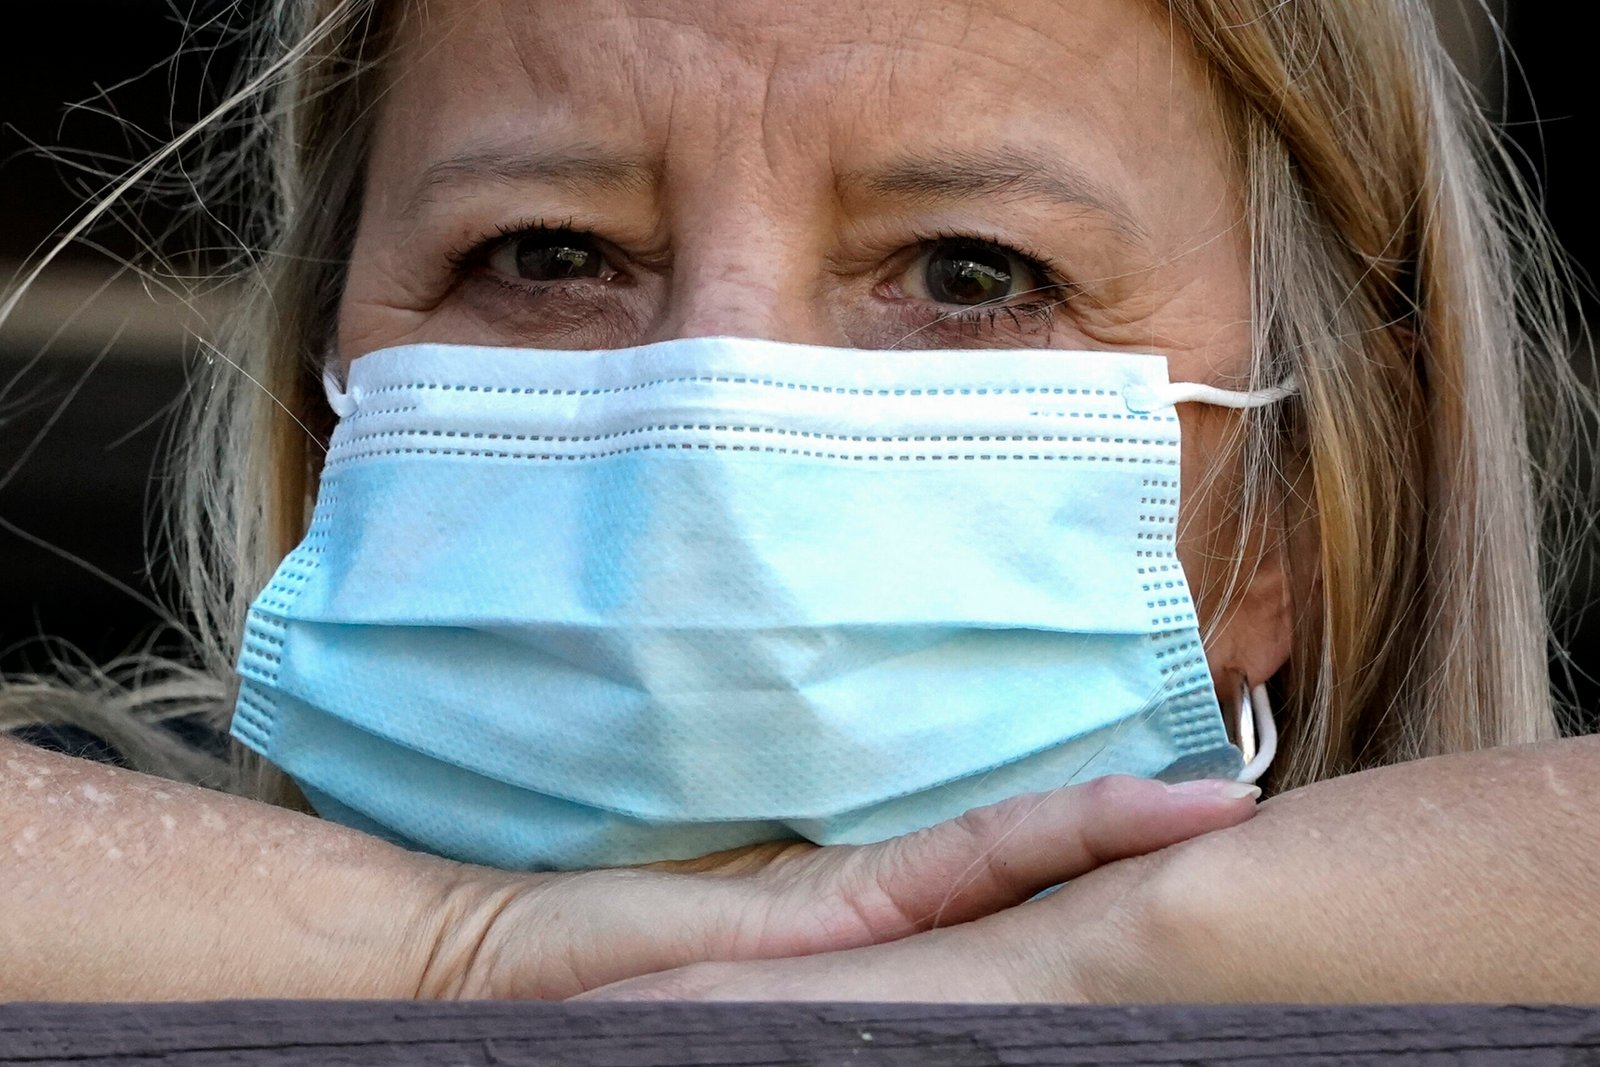 How to stay healthy during cold flu and COVID 19 season